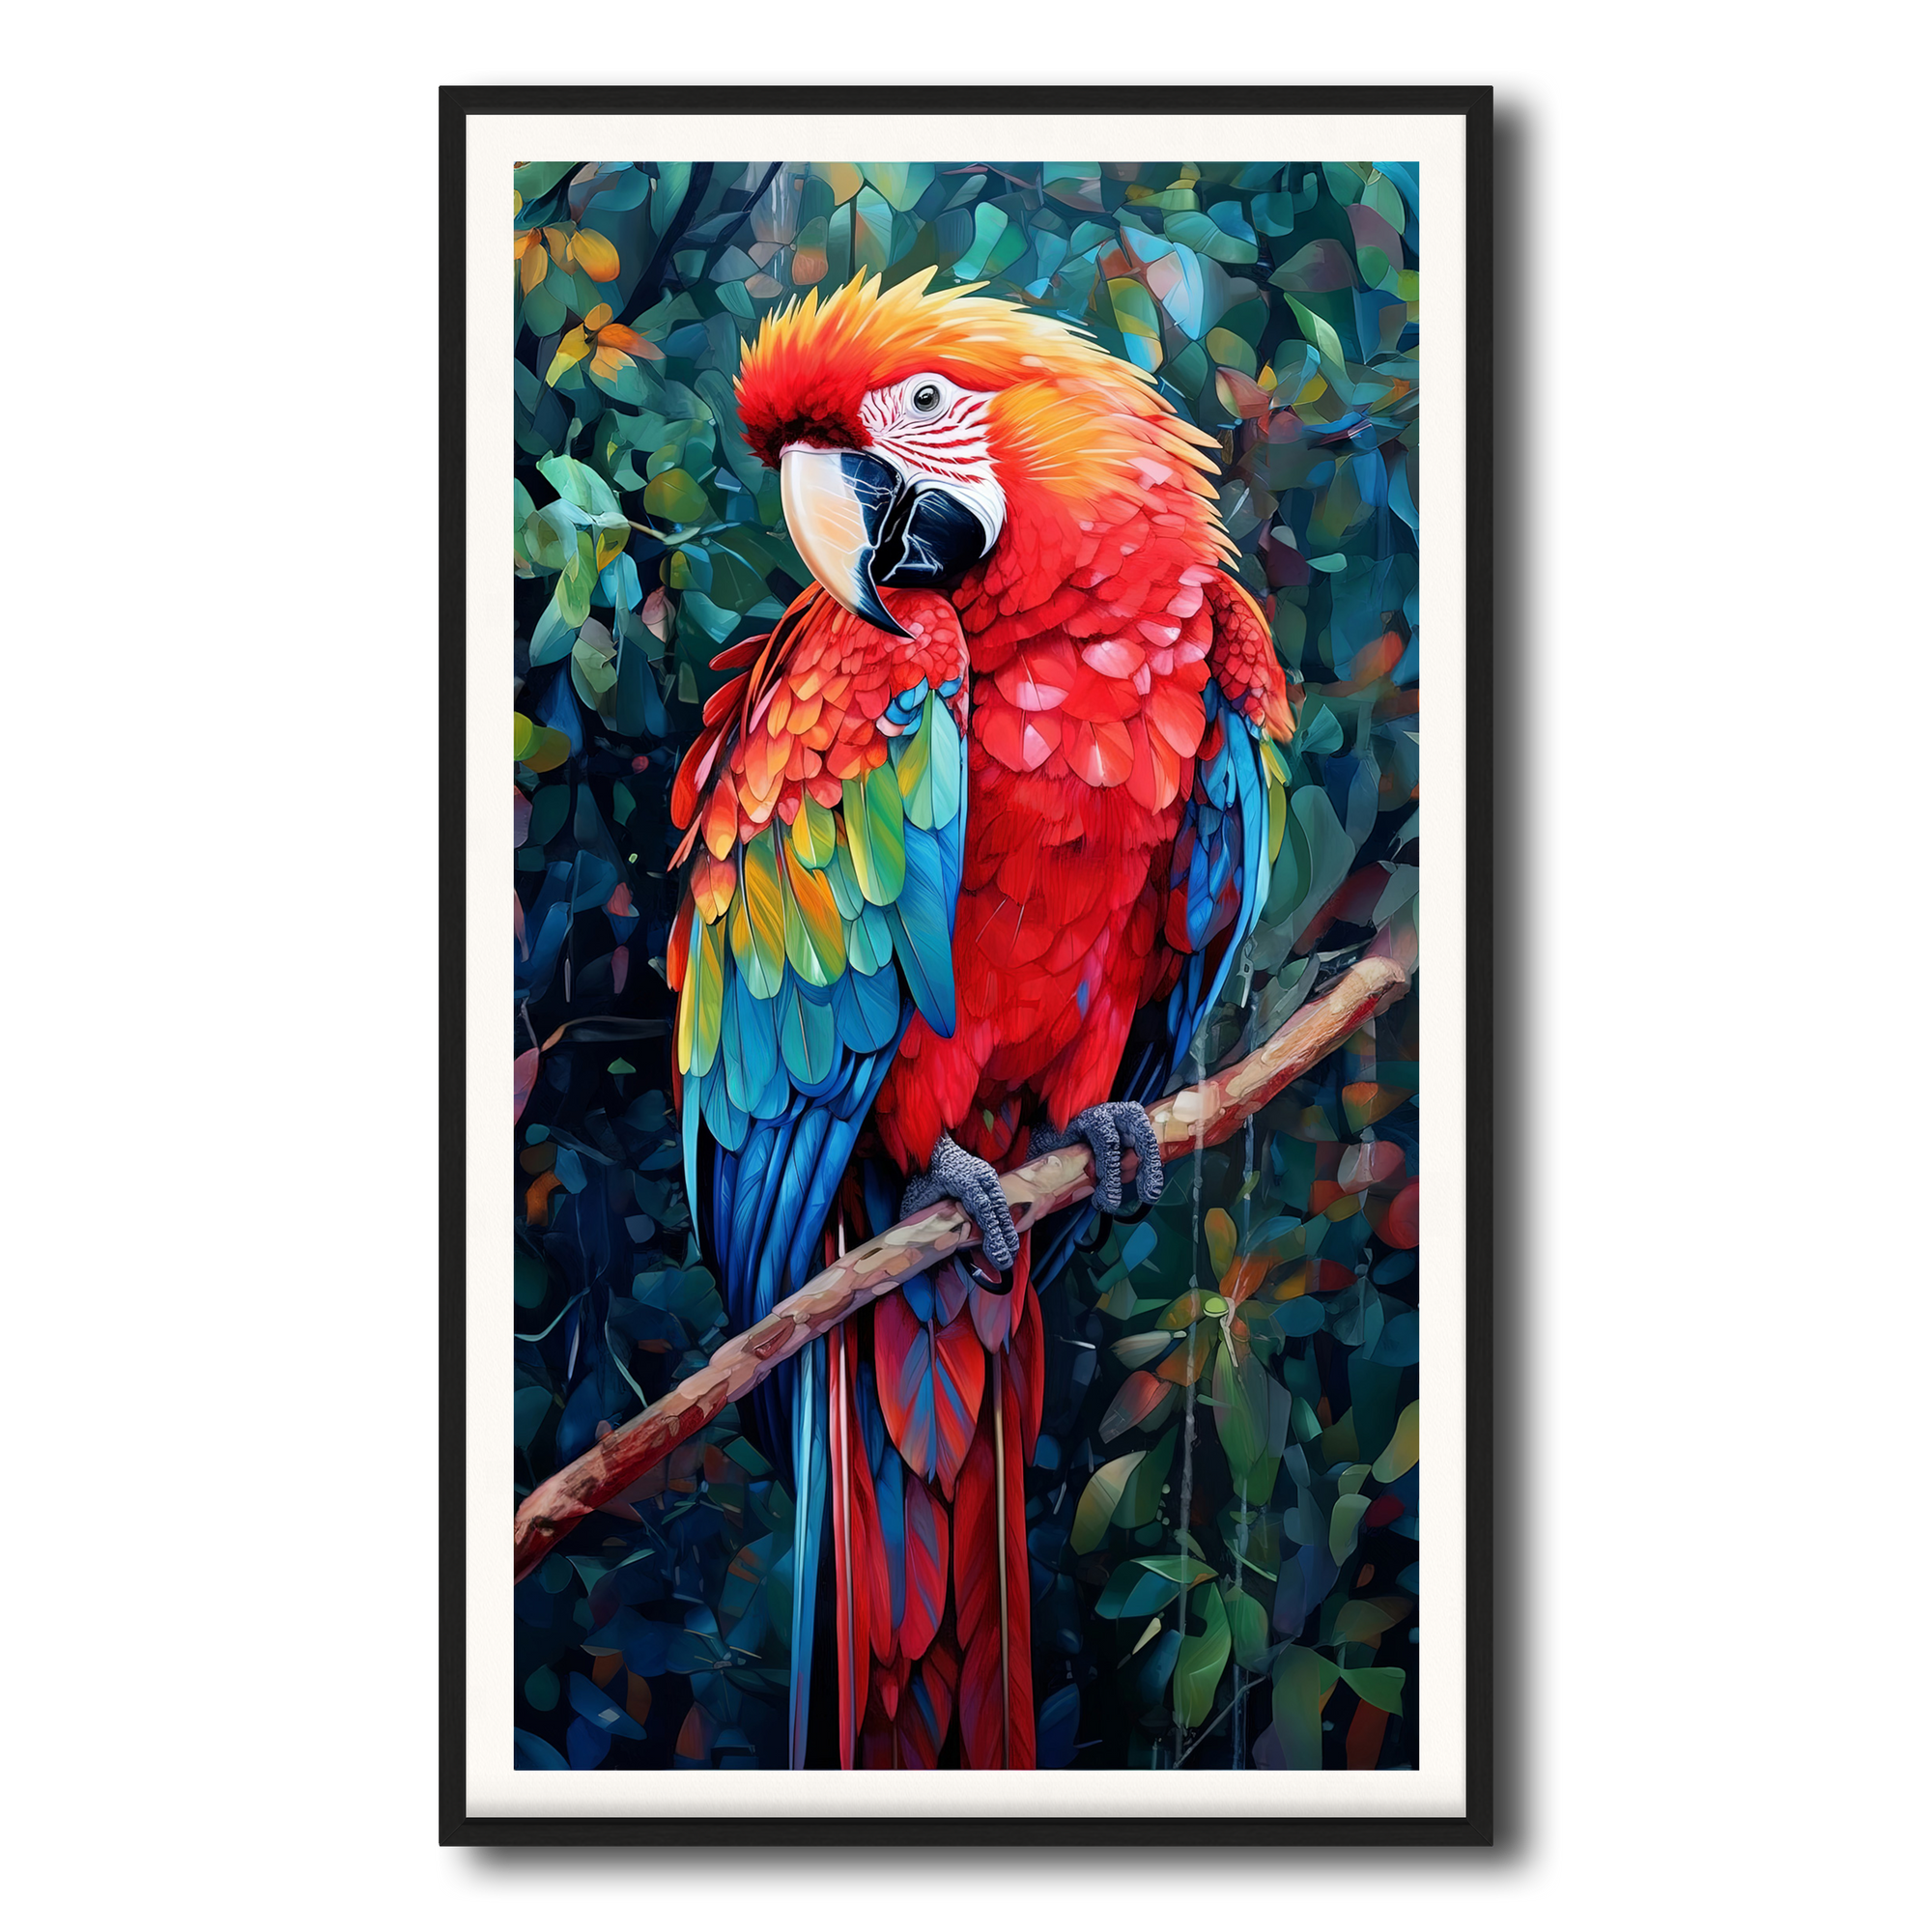 A Macaw’s Reverie